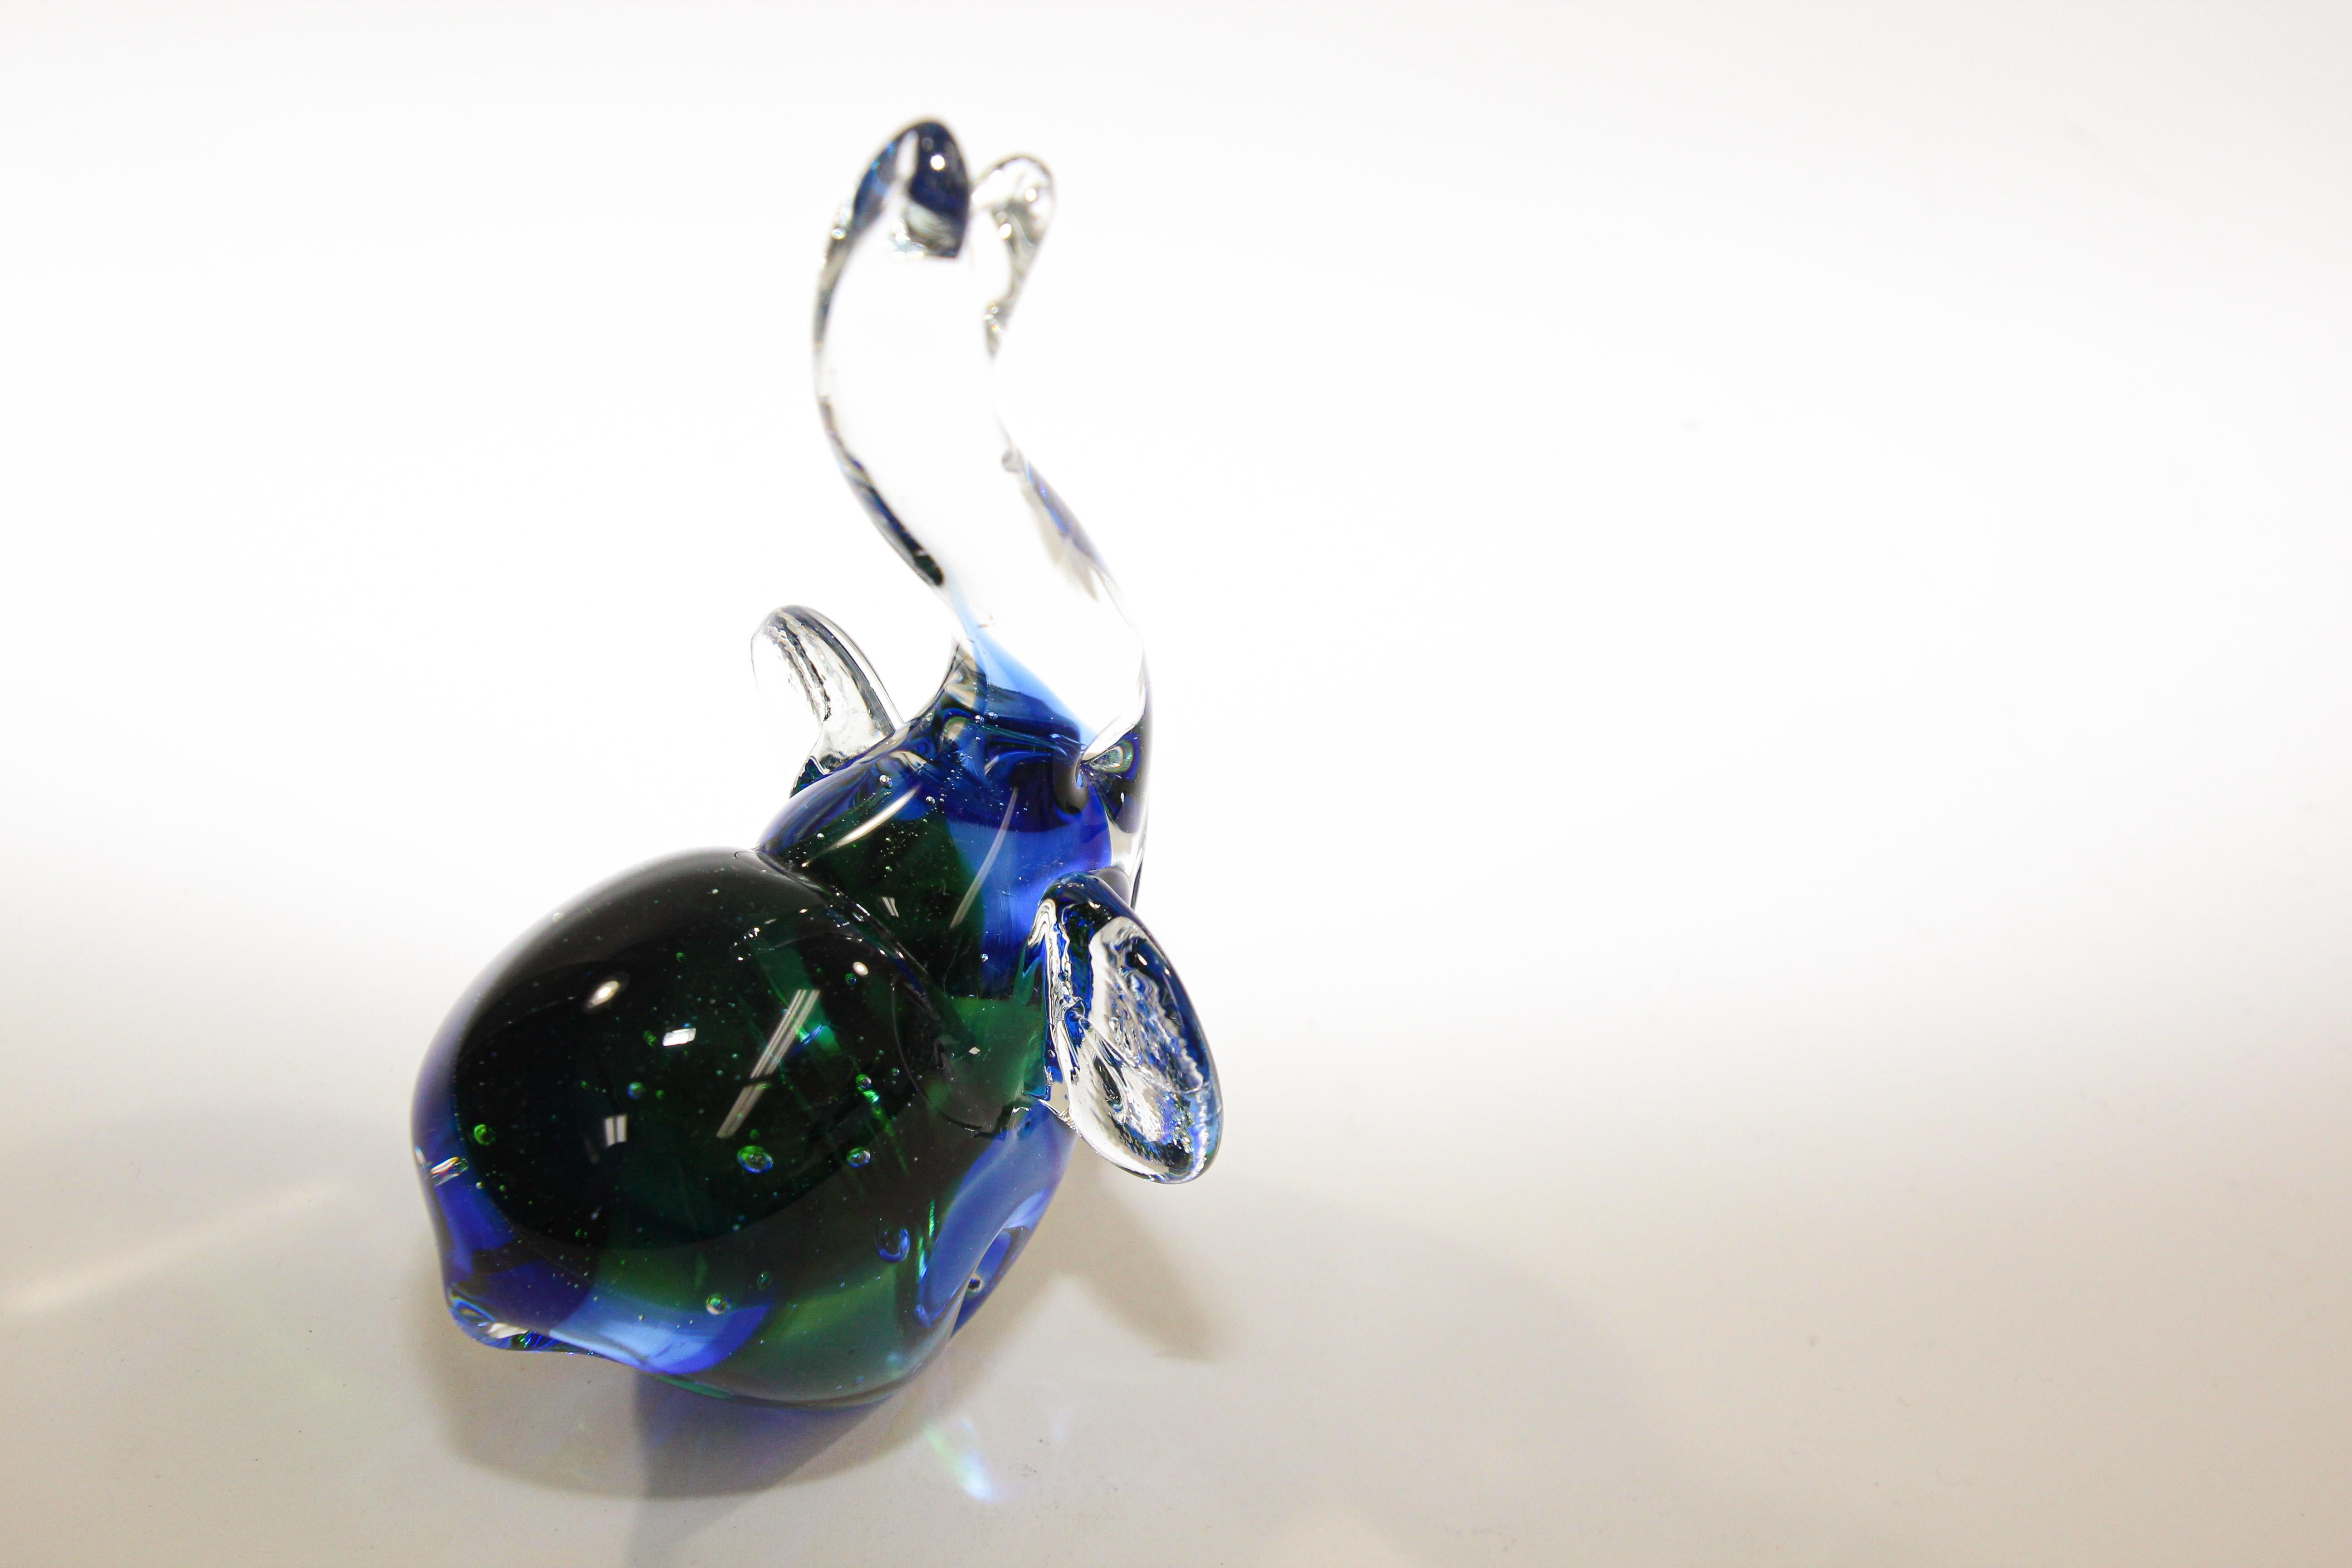 20th Century Vintage Emerald Green and Blue Murano Art Glass Elephant Sculpture Paperweight For Sale